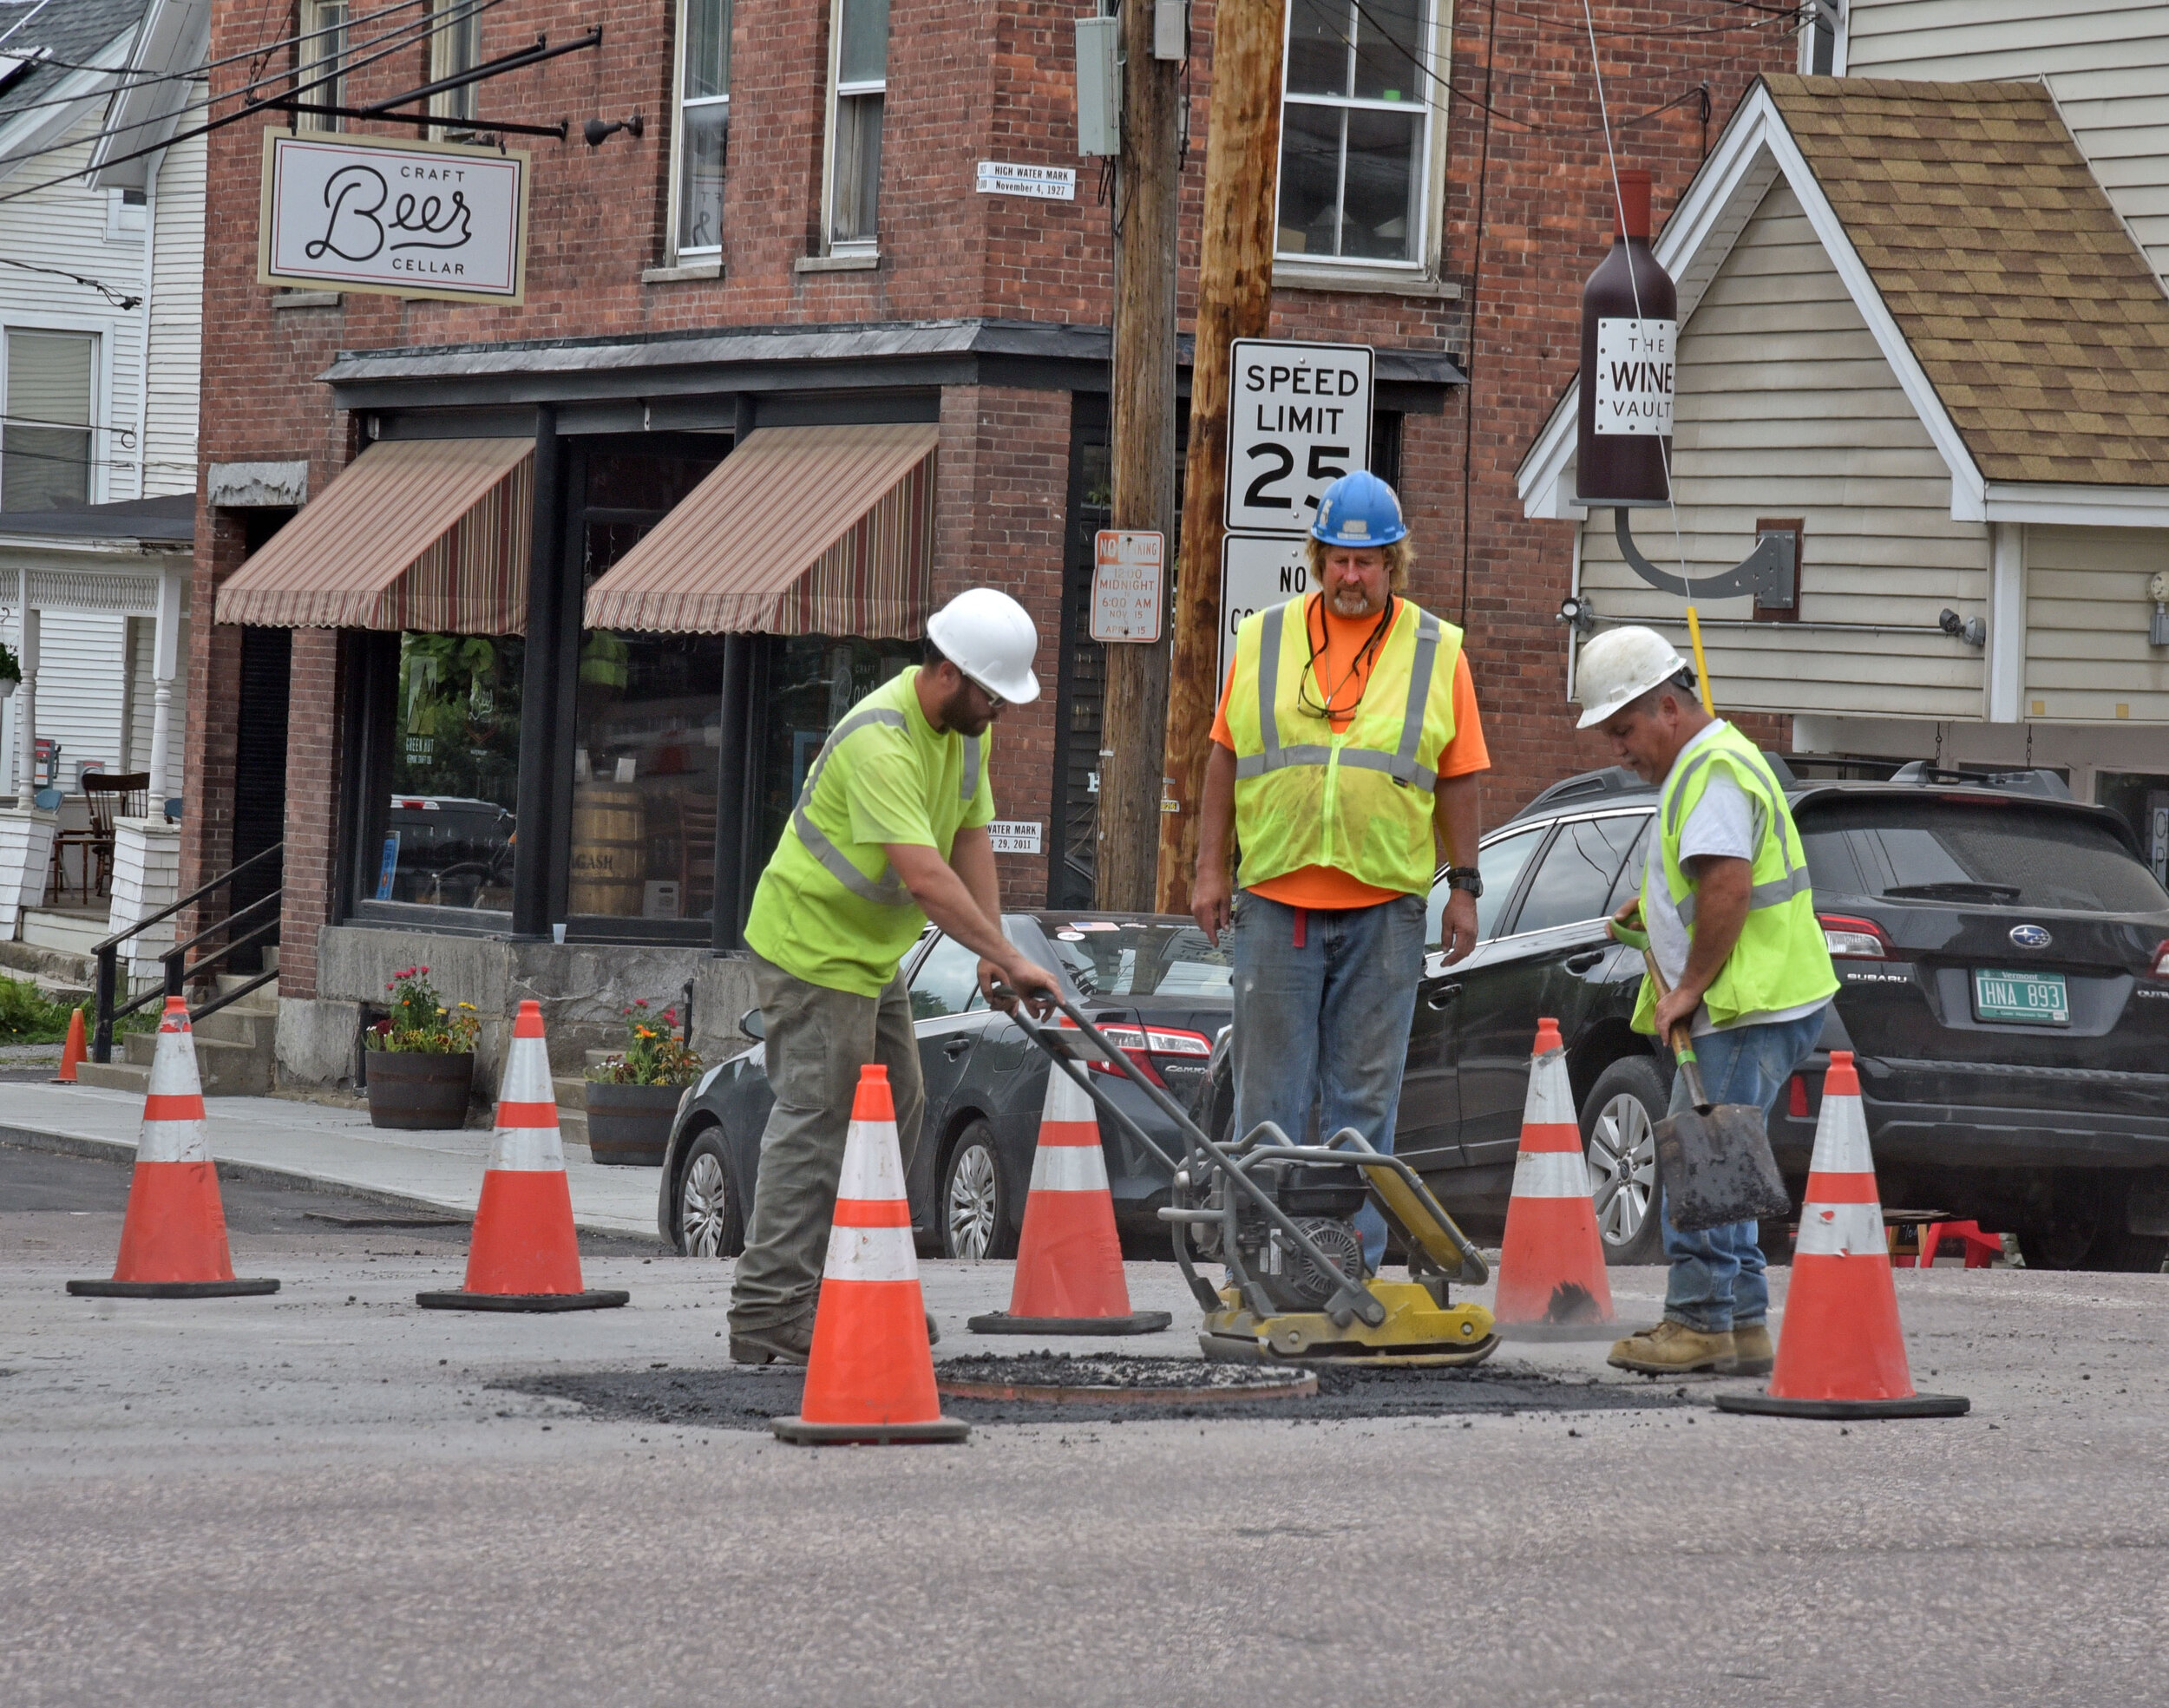   Workers prep areas around manholes and underground utility accesses ahead of final paving. Photo by Gordon Miller  